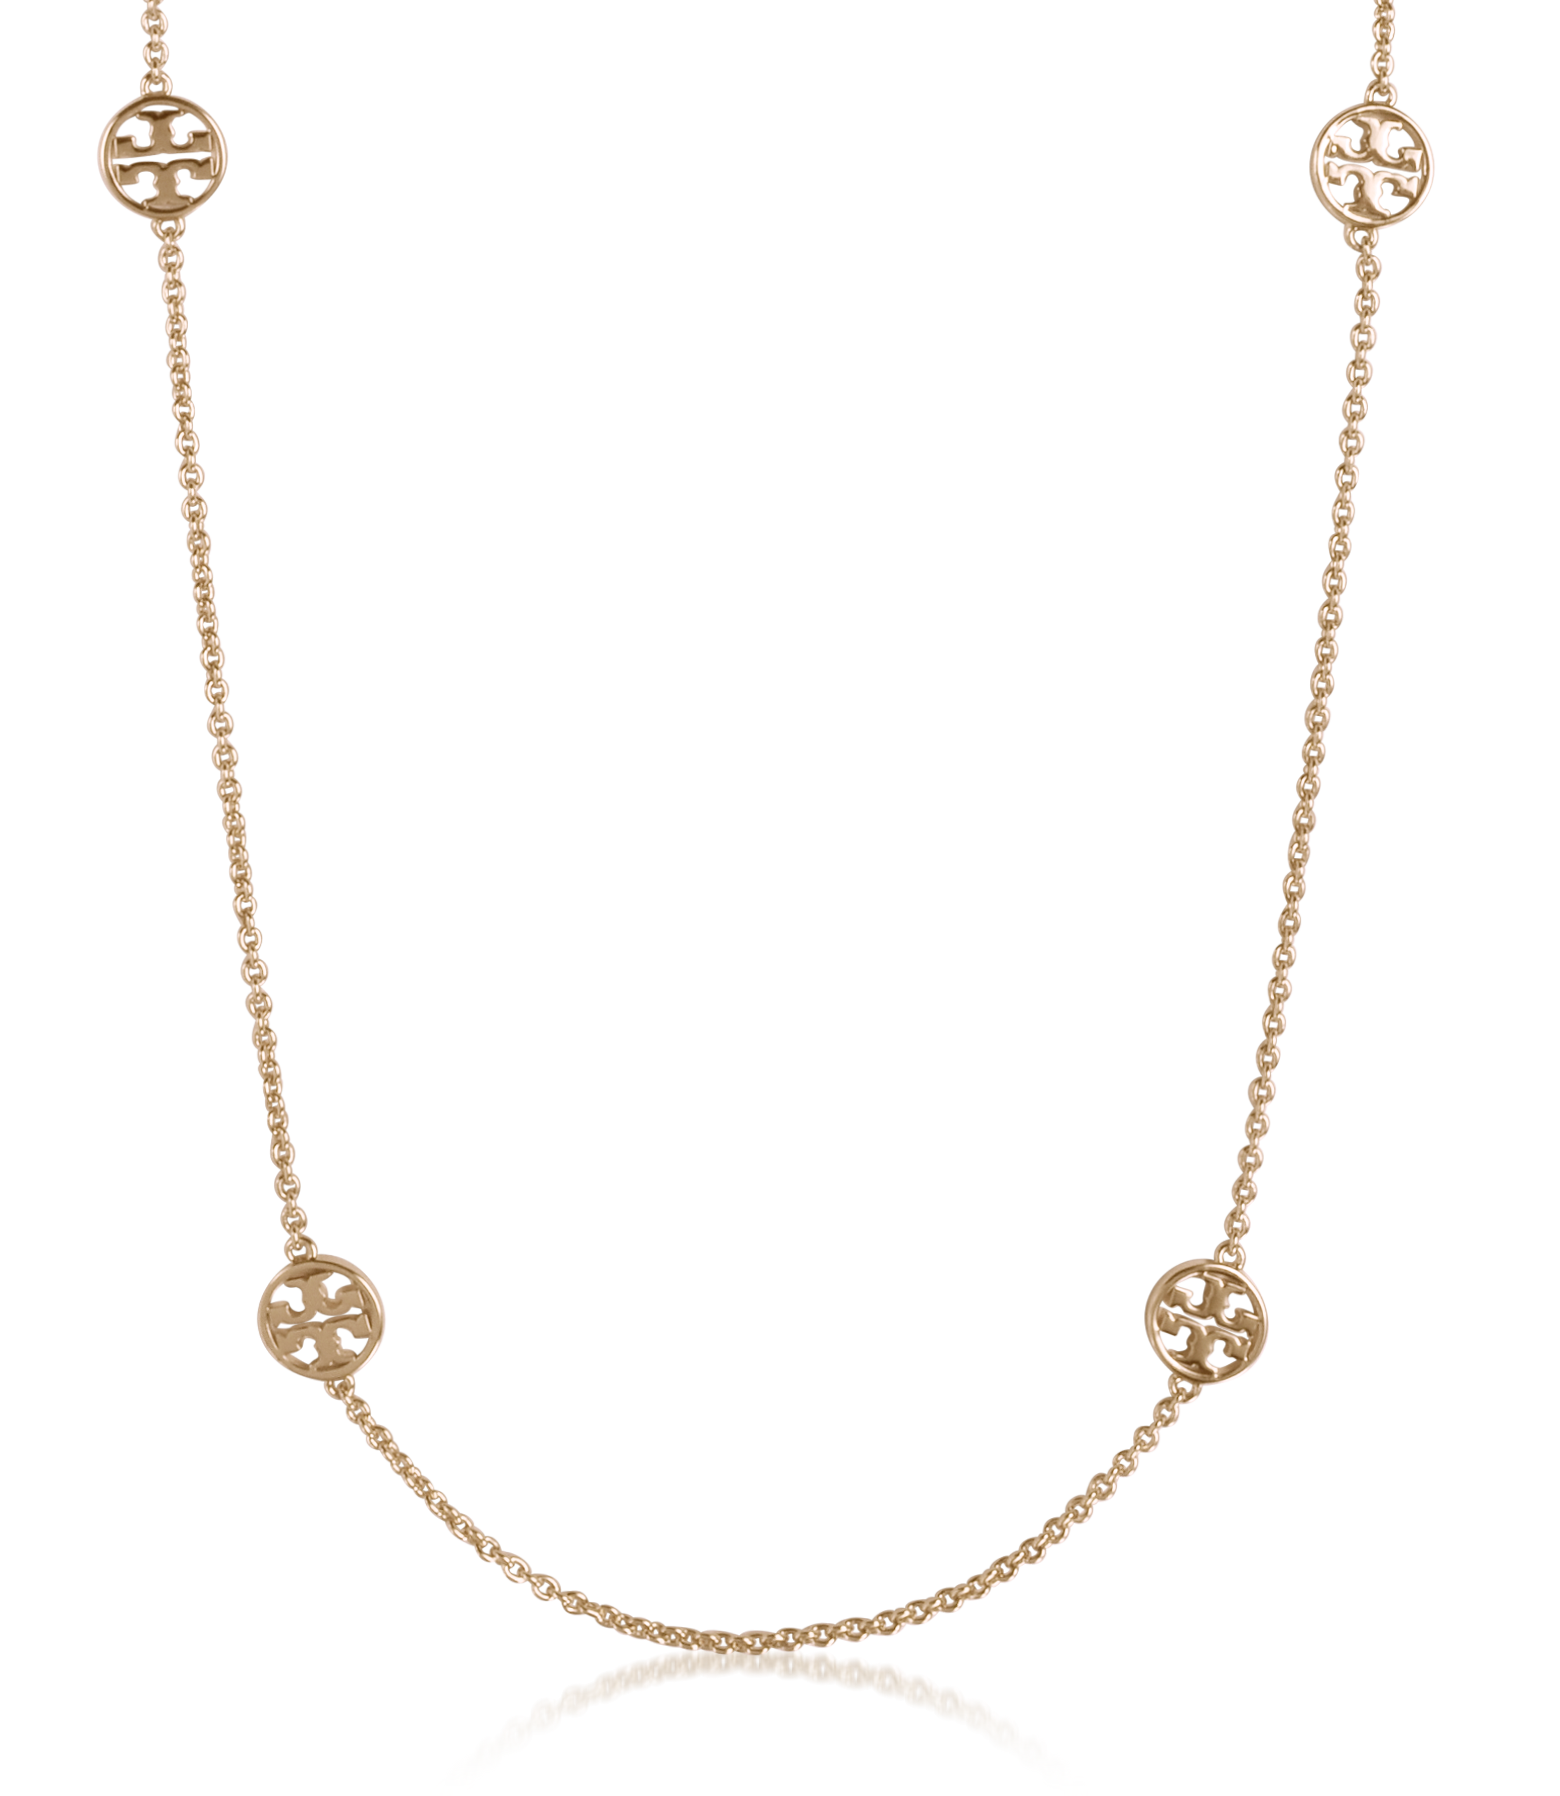 Tory Burch Delicate Logo Necklace